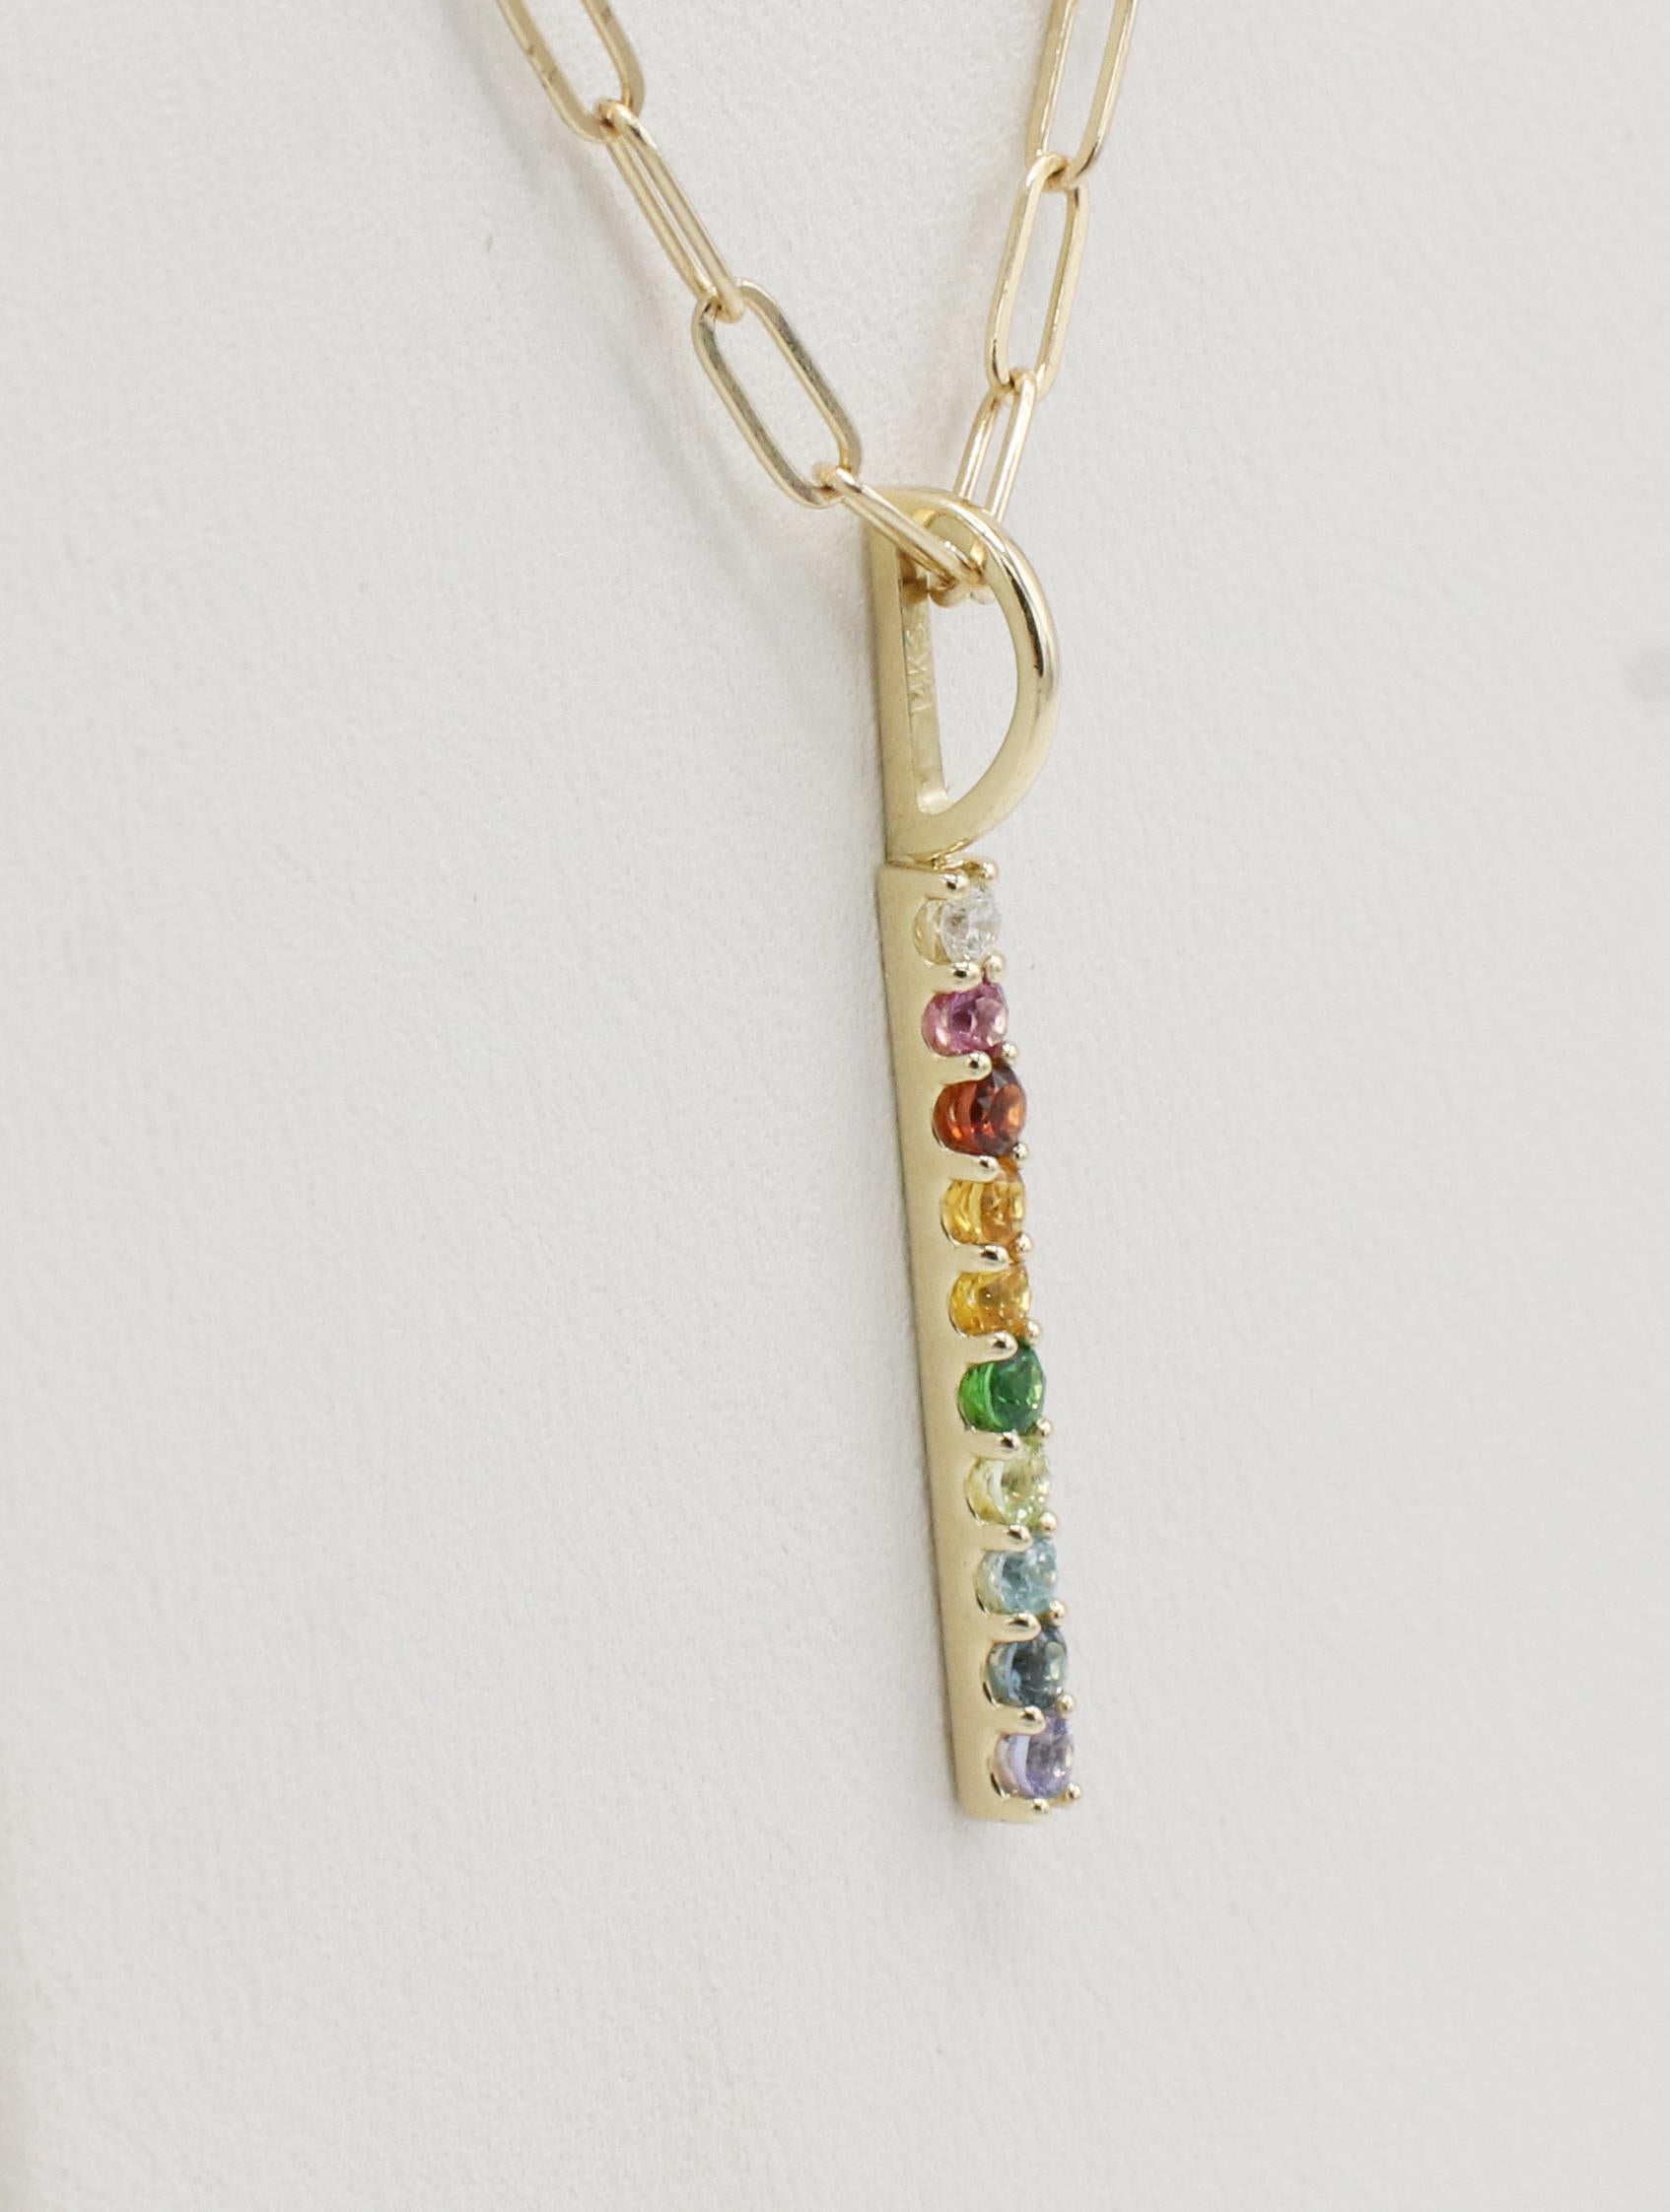 14 Karat Yellow Natural Multi-Gemstone Rainbow Bar Drop Paperclip Necklace
Metal: 14k yellow gold
Weight: 3.17 grams
Chain: 18 inches
Pendant: 26.5 x 2mm
